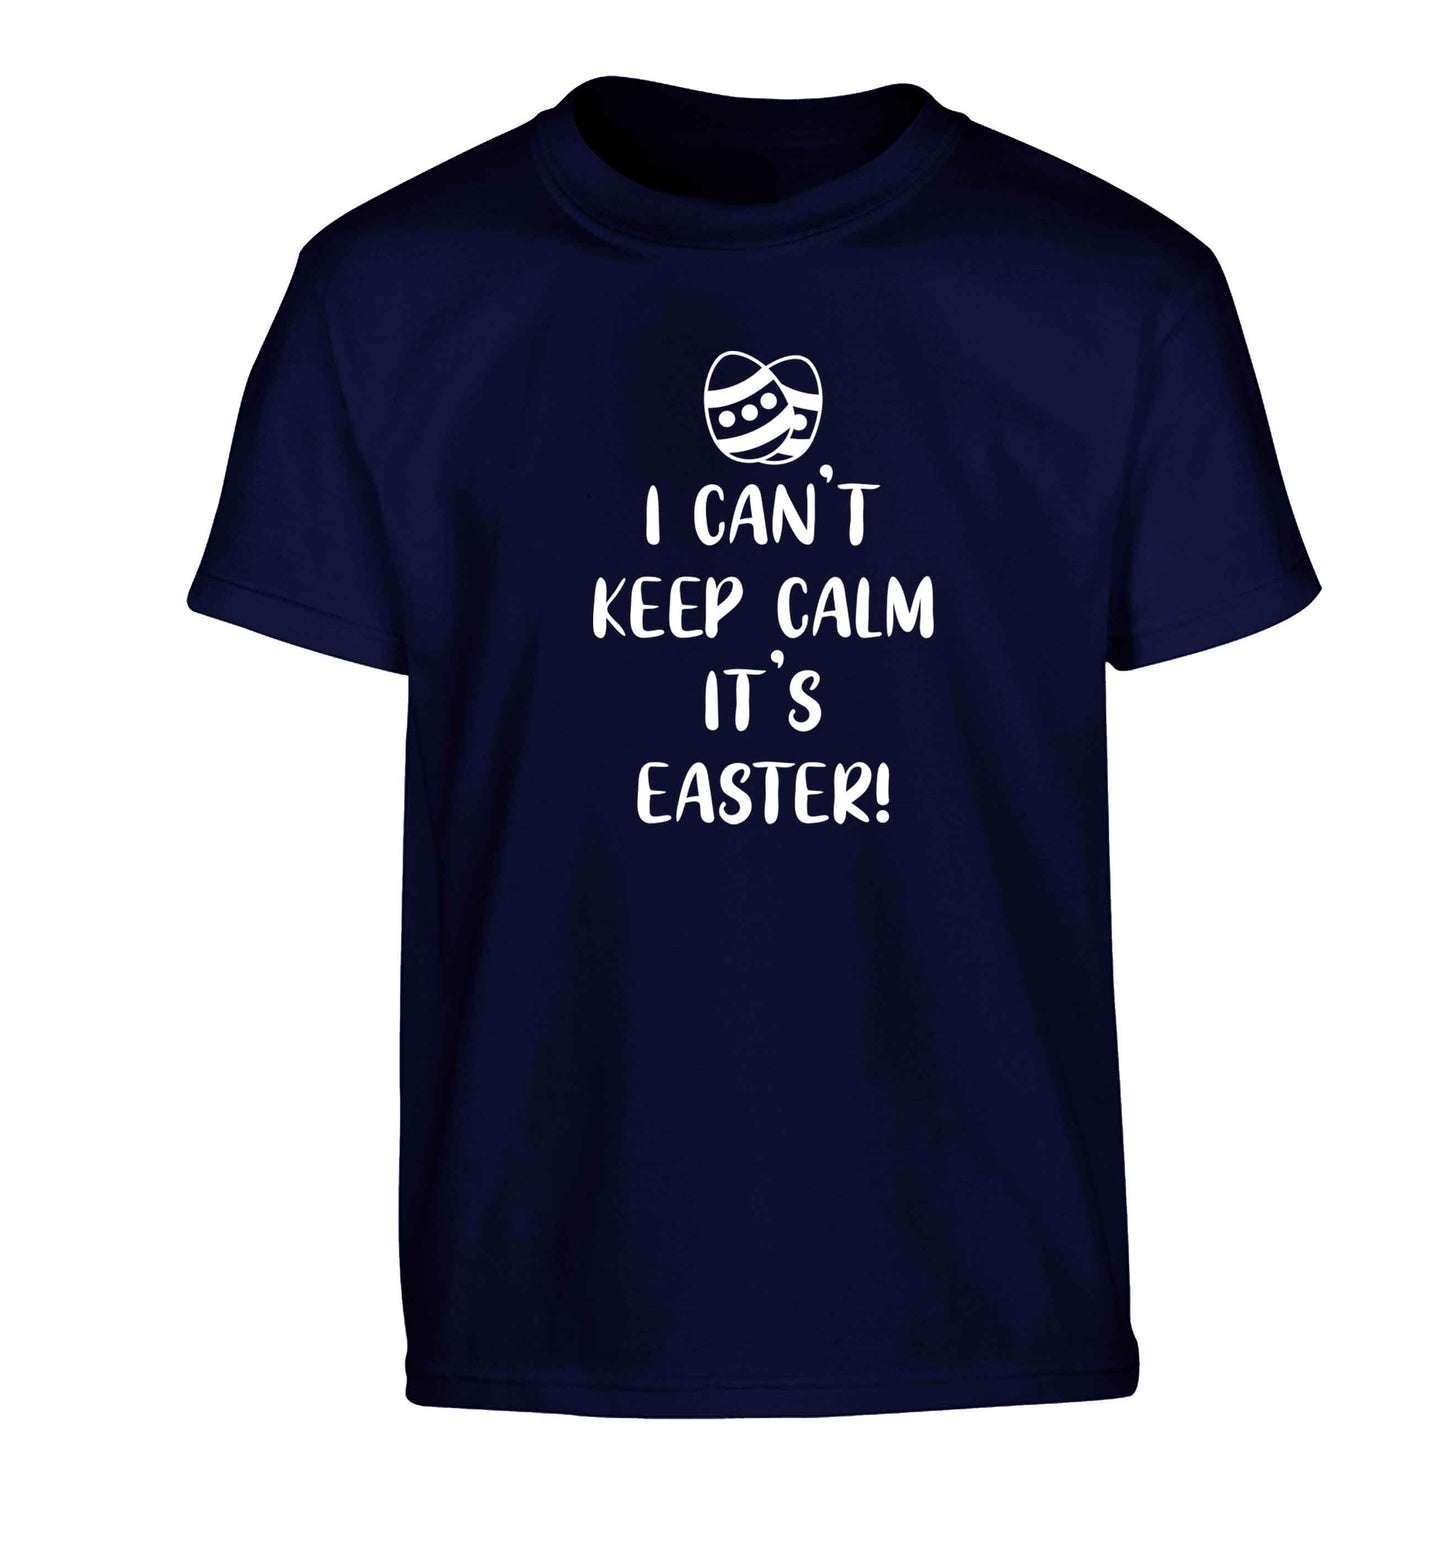 I can't keep calm it's Easter Children's navy Tshirt 12-13 Years